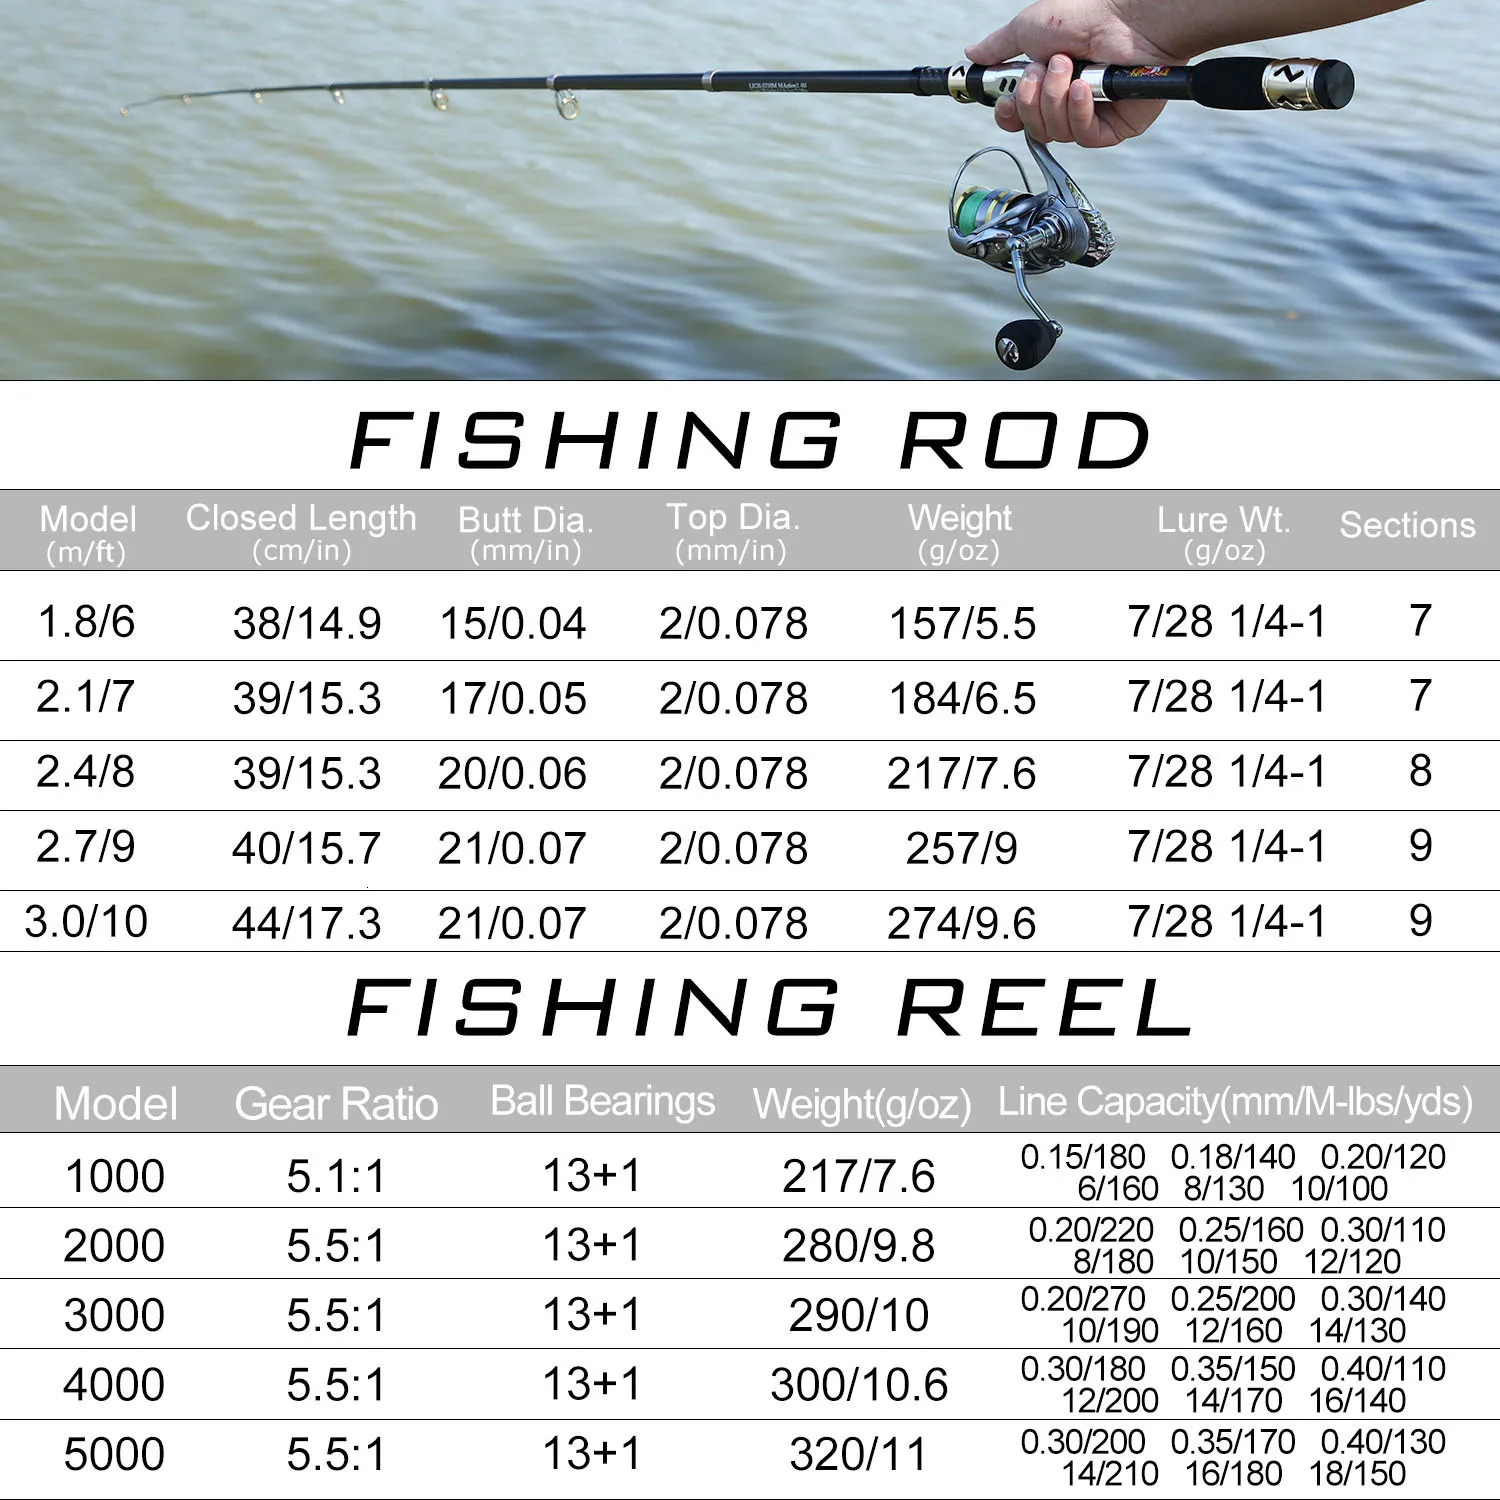 Sougayilang Fishing Combo Carbon Fiber Telescopic Rod Reel And Spinning  Combo With 13+ BB And Outdoor Gear Suitcase Kit 230609 From Ren05, $55.99